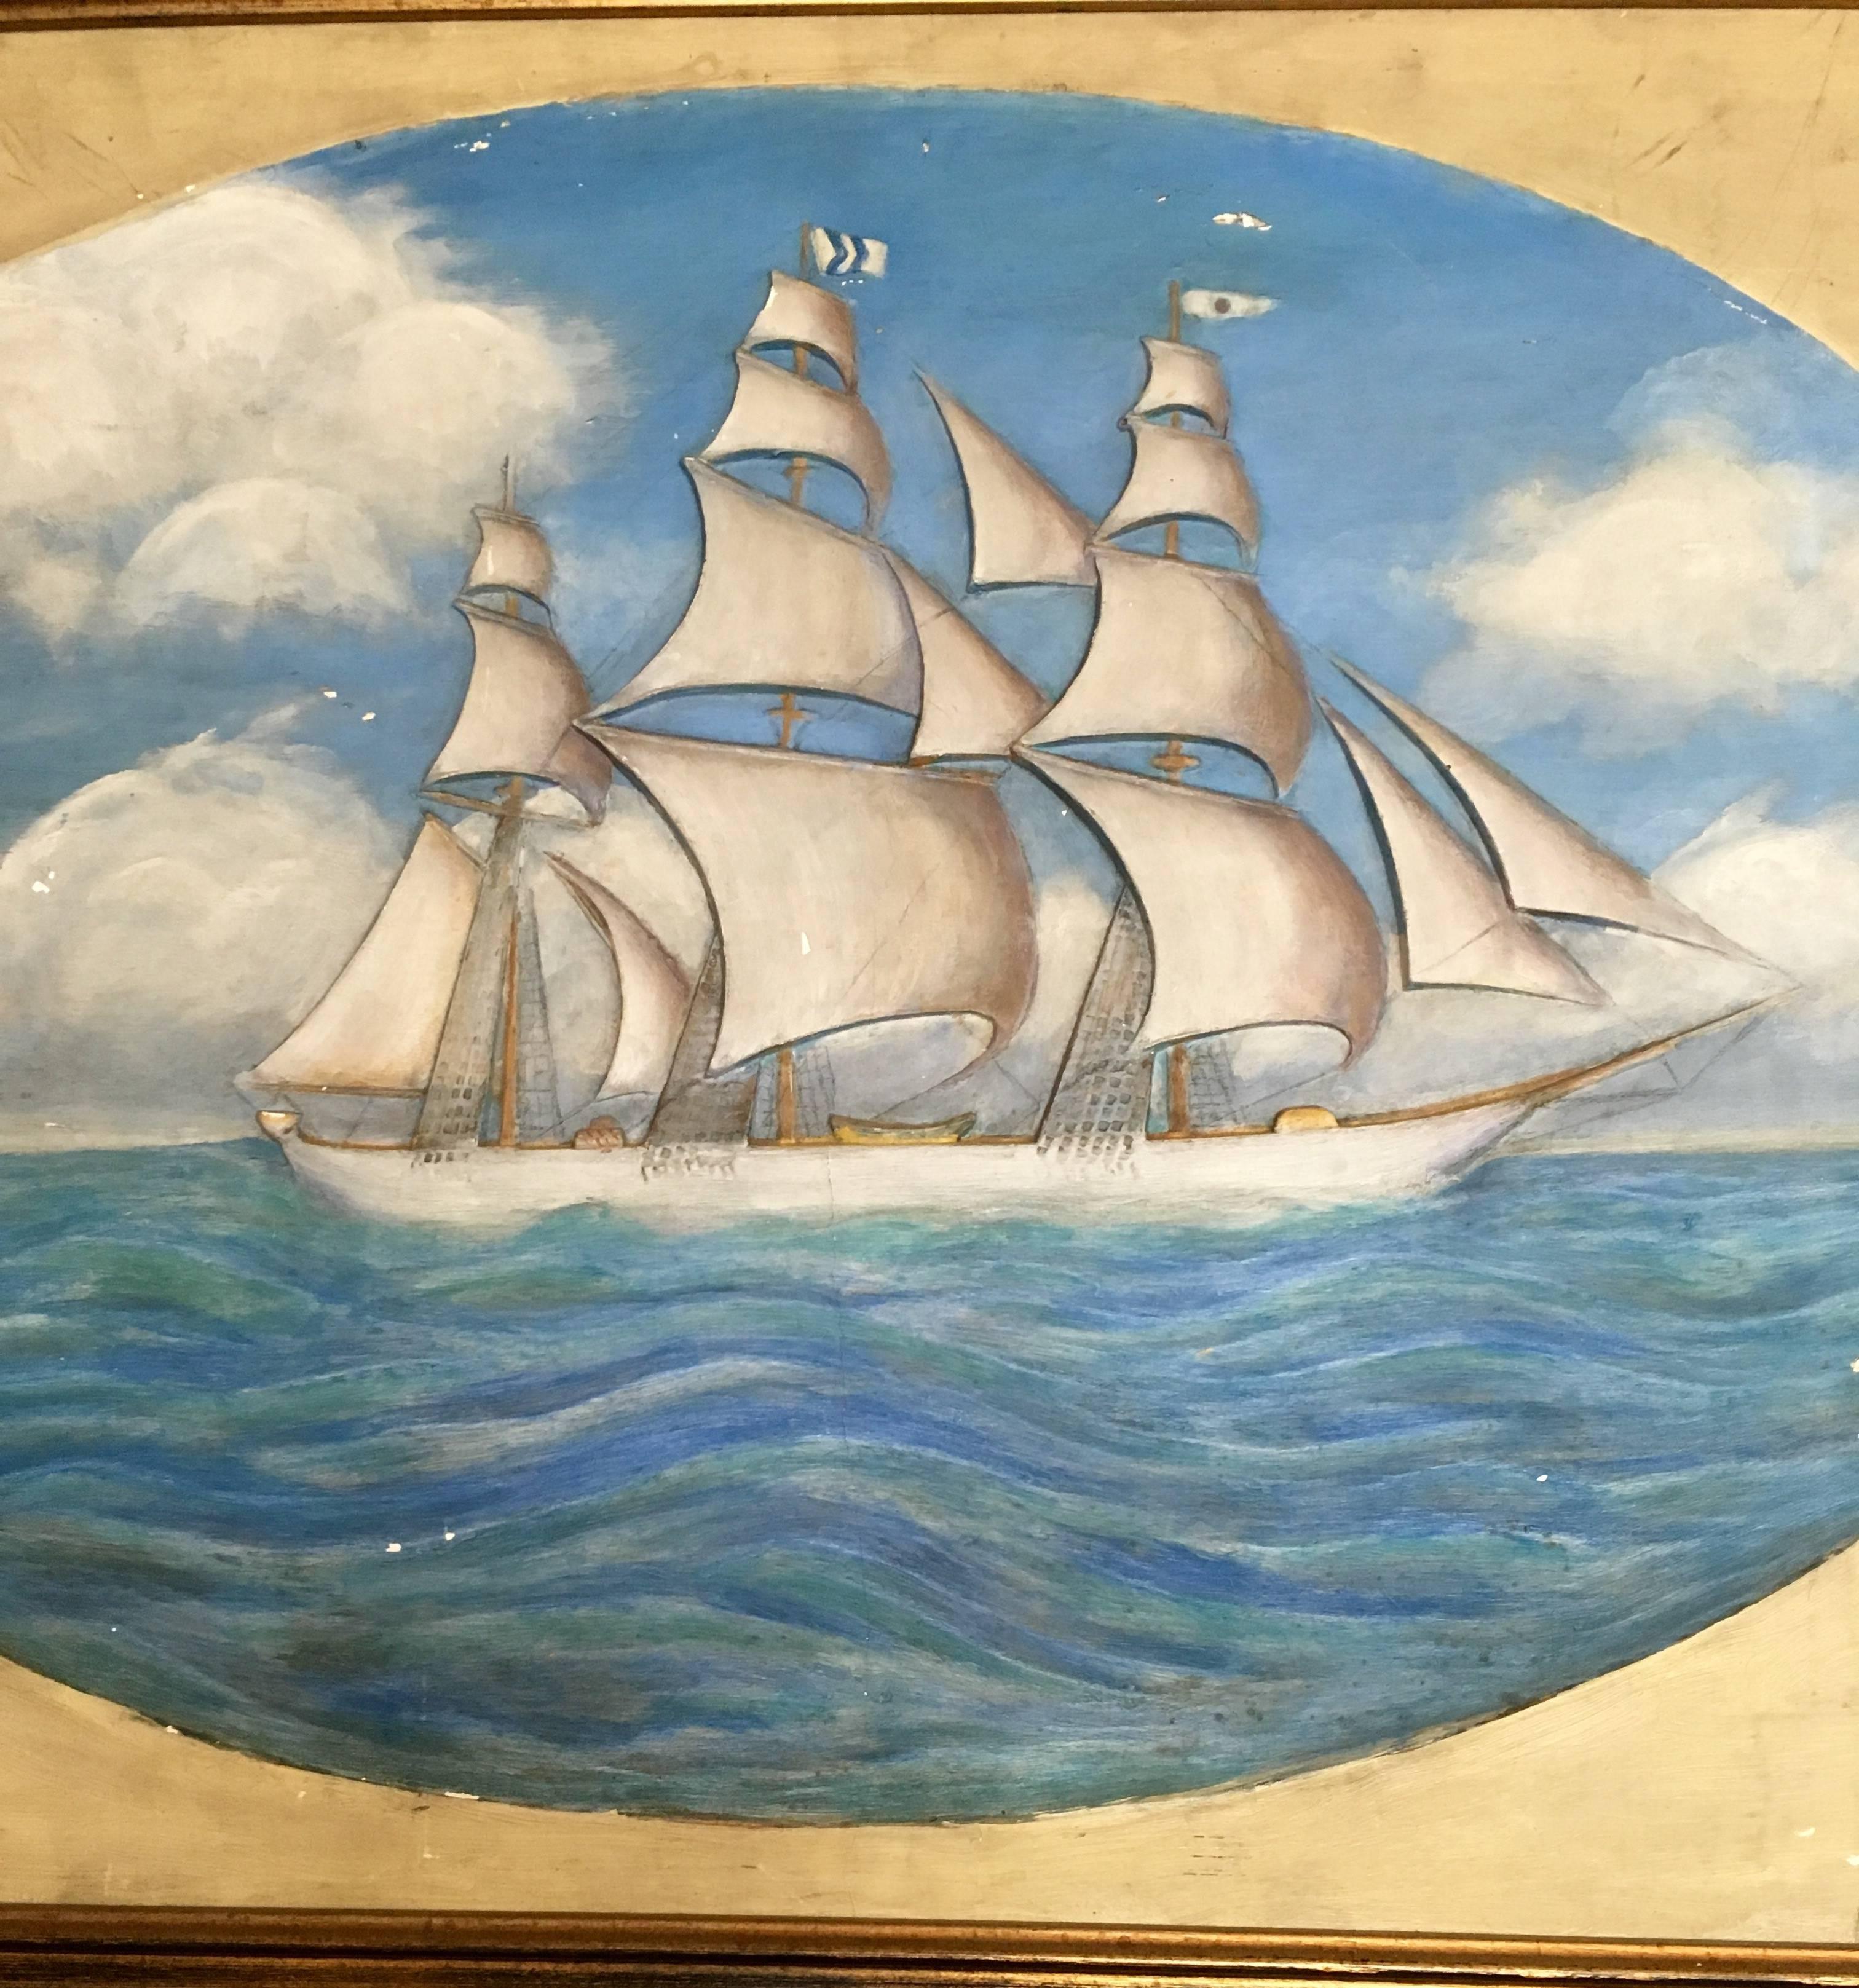 Folk Art Seascape, circa 1920. A bas relief sculpted plaster plaque with hand-painted portrait of a fully rigged ship on port tack, with stay sails aloft, unsigned. Very unusual. In very good to excellent condition, with just a hairline in the